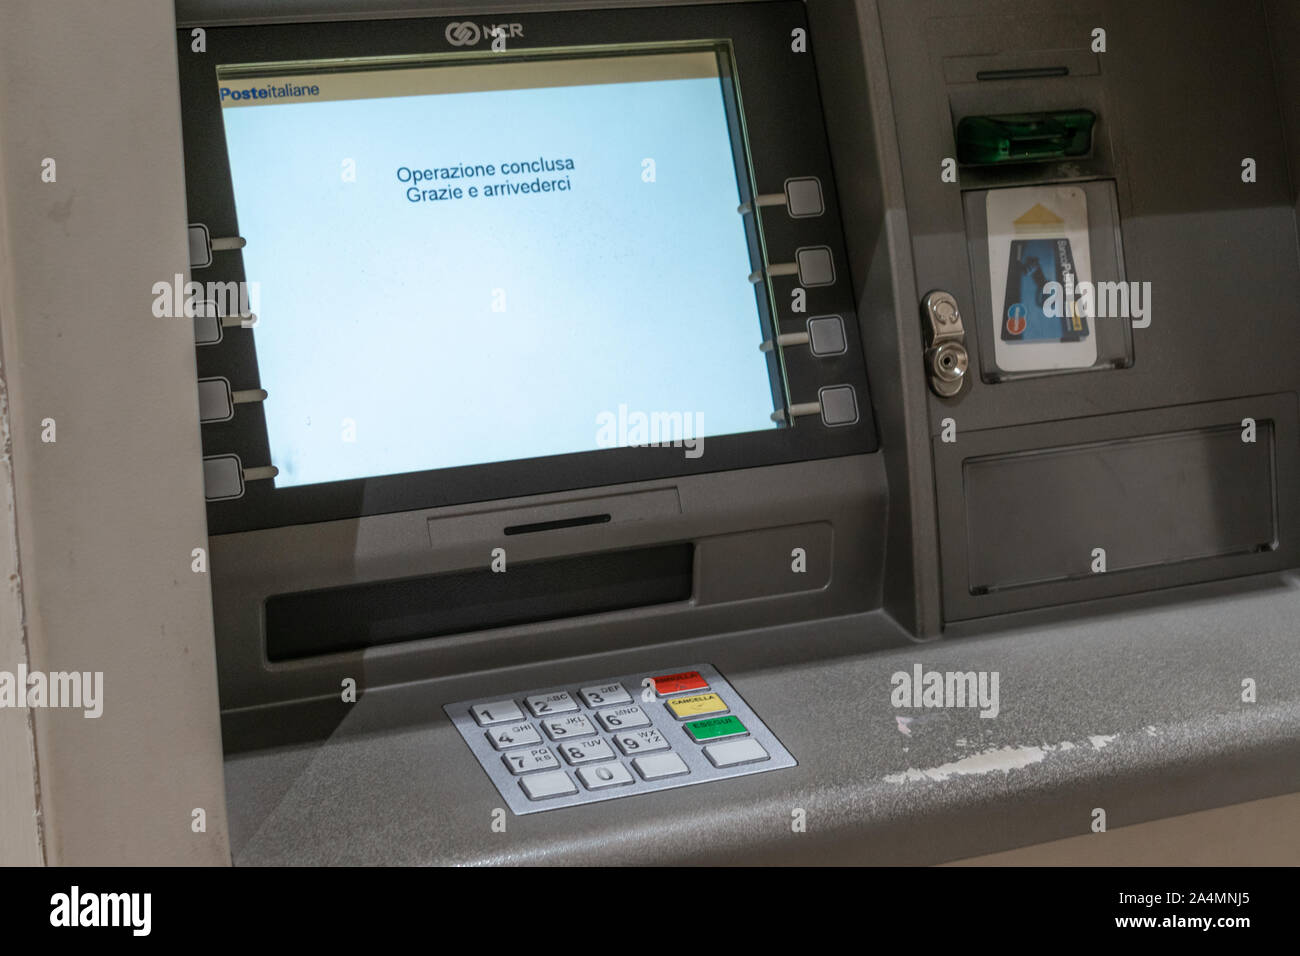 Parma, Italy - October 13th 2019: Poste Italiane cash machine for money withdrawal Stock Photo